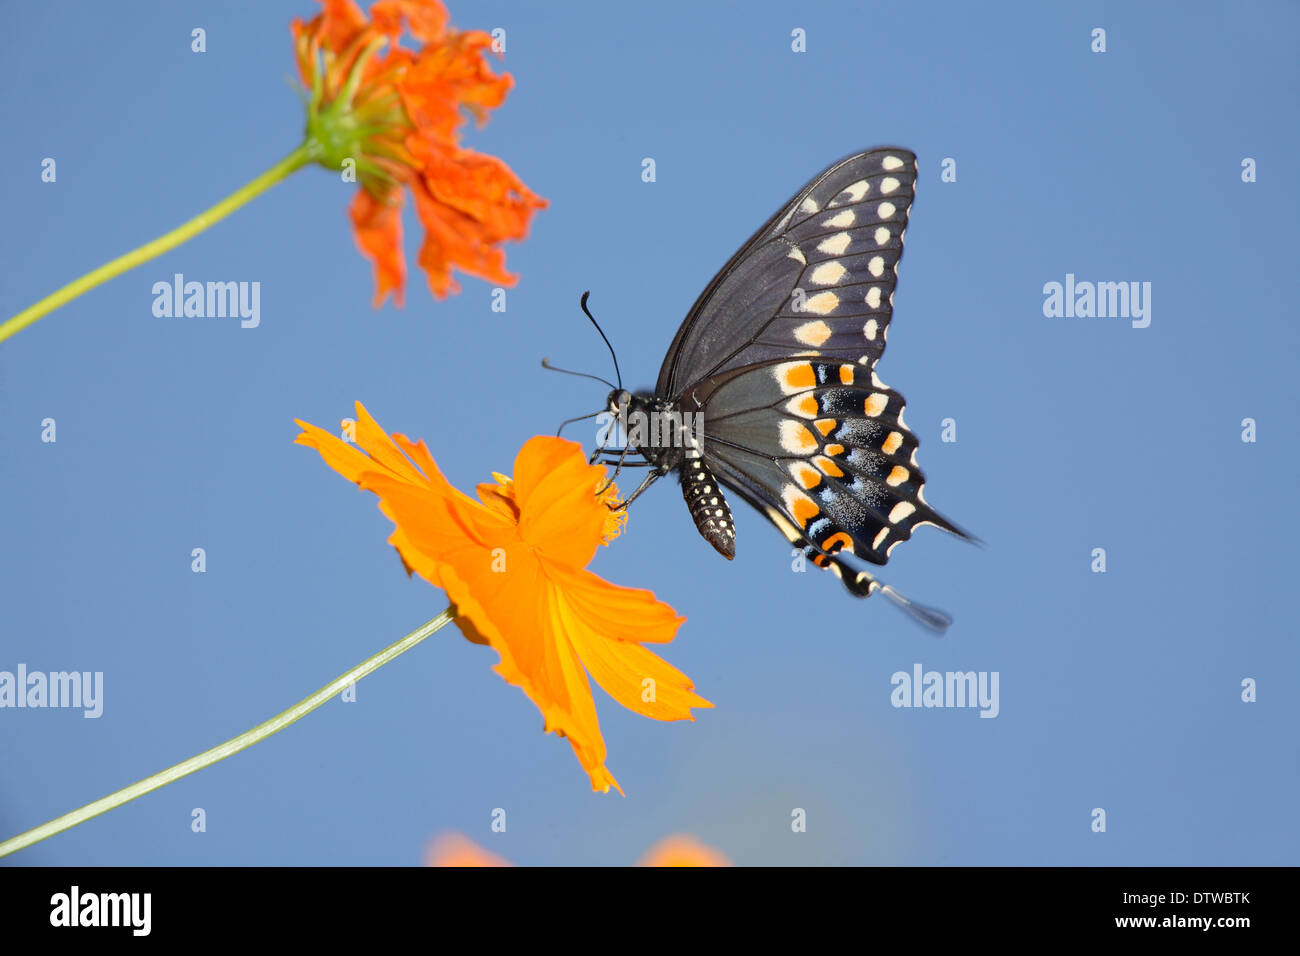 A Black Swallowtail Butterfly On An Orange Flower, Papilio polyxenes Fabricius Stock Photo